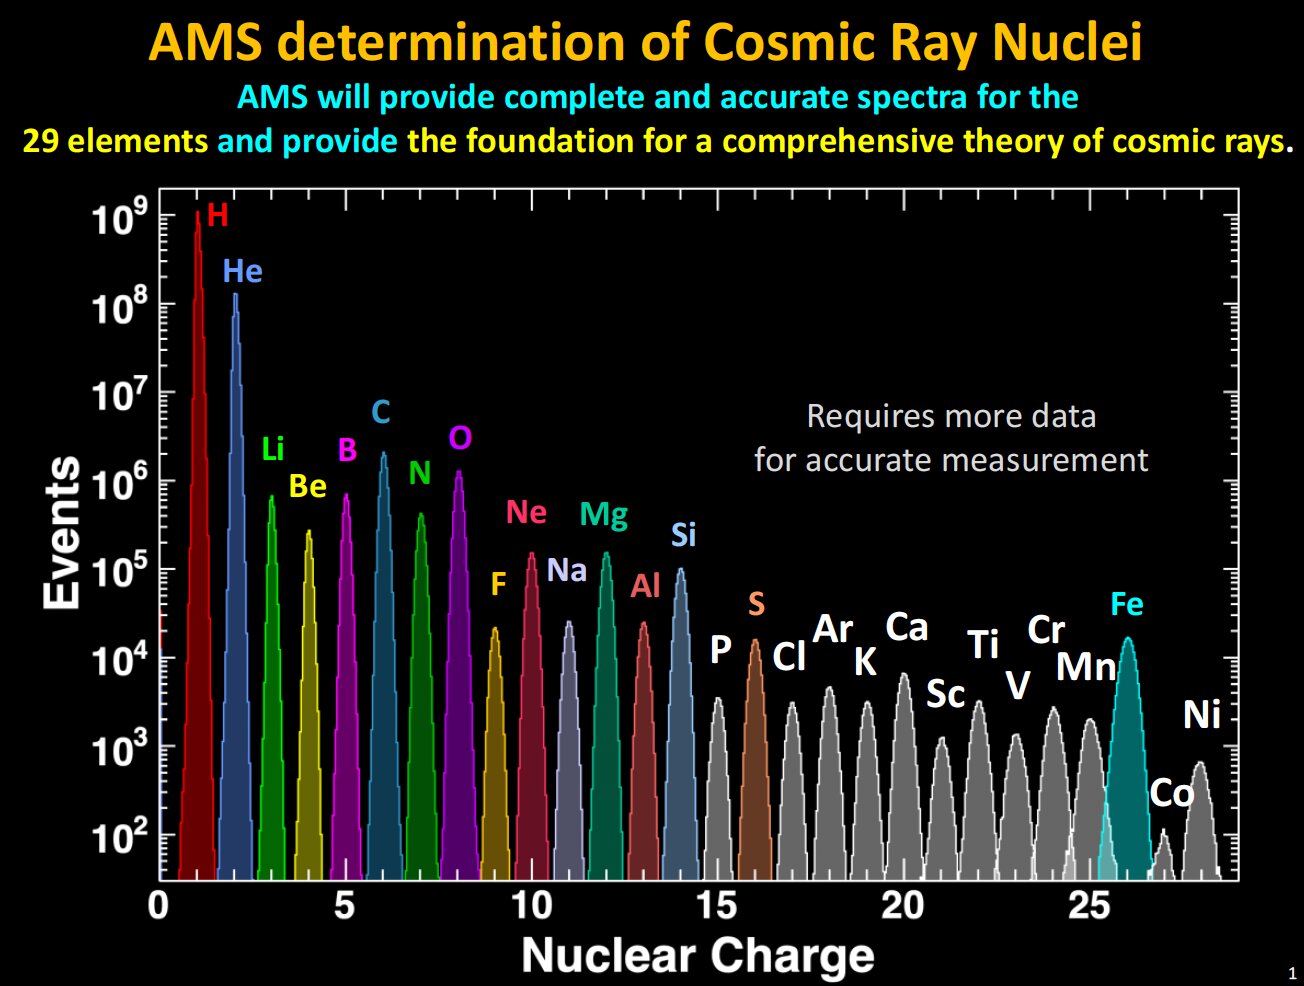 The AMS measured charge Z of all the cosmic ray nuclei up to Ni.